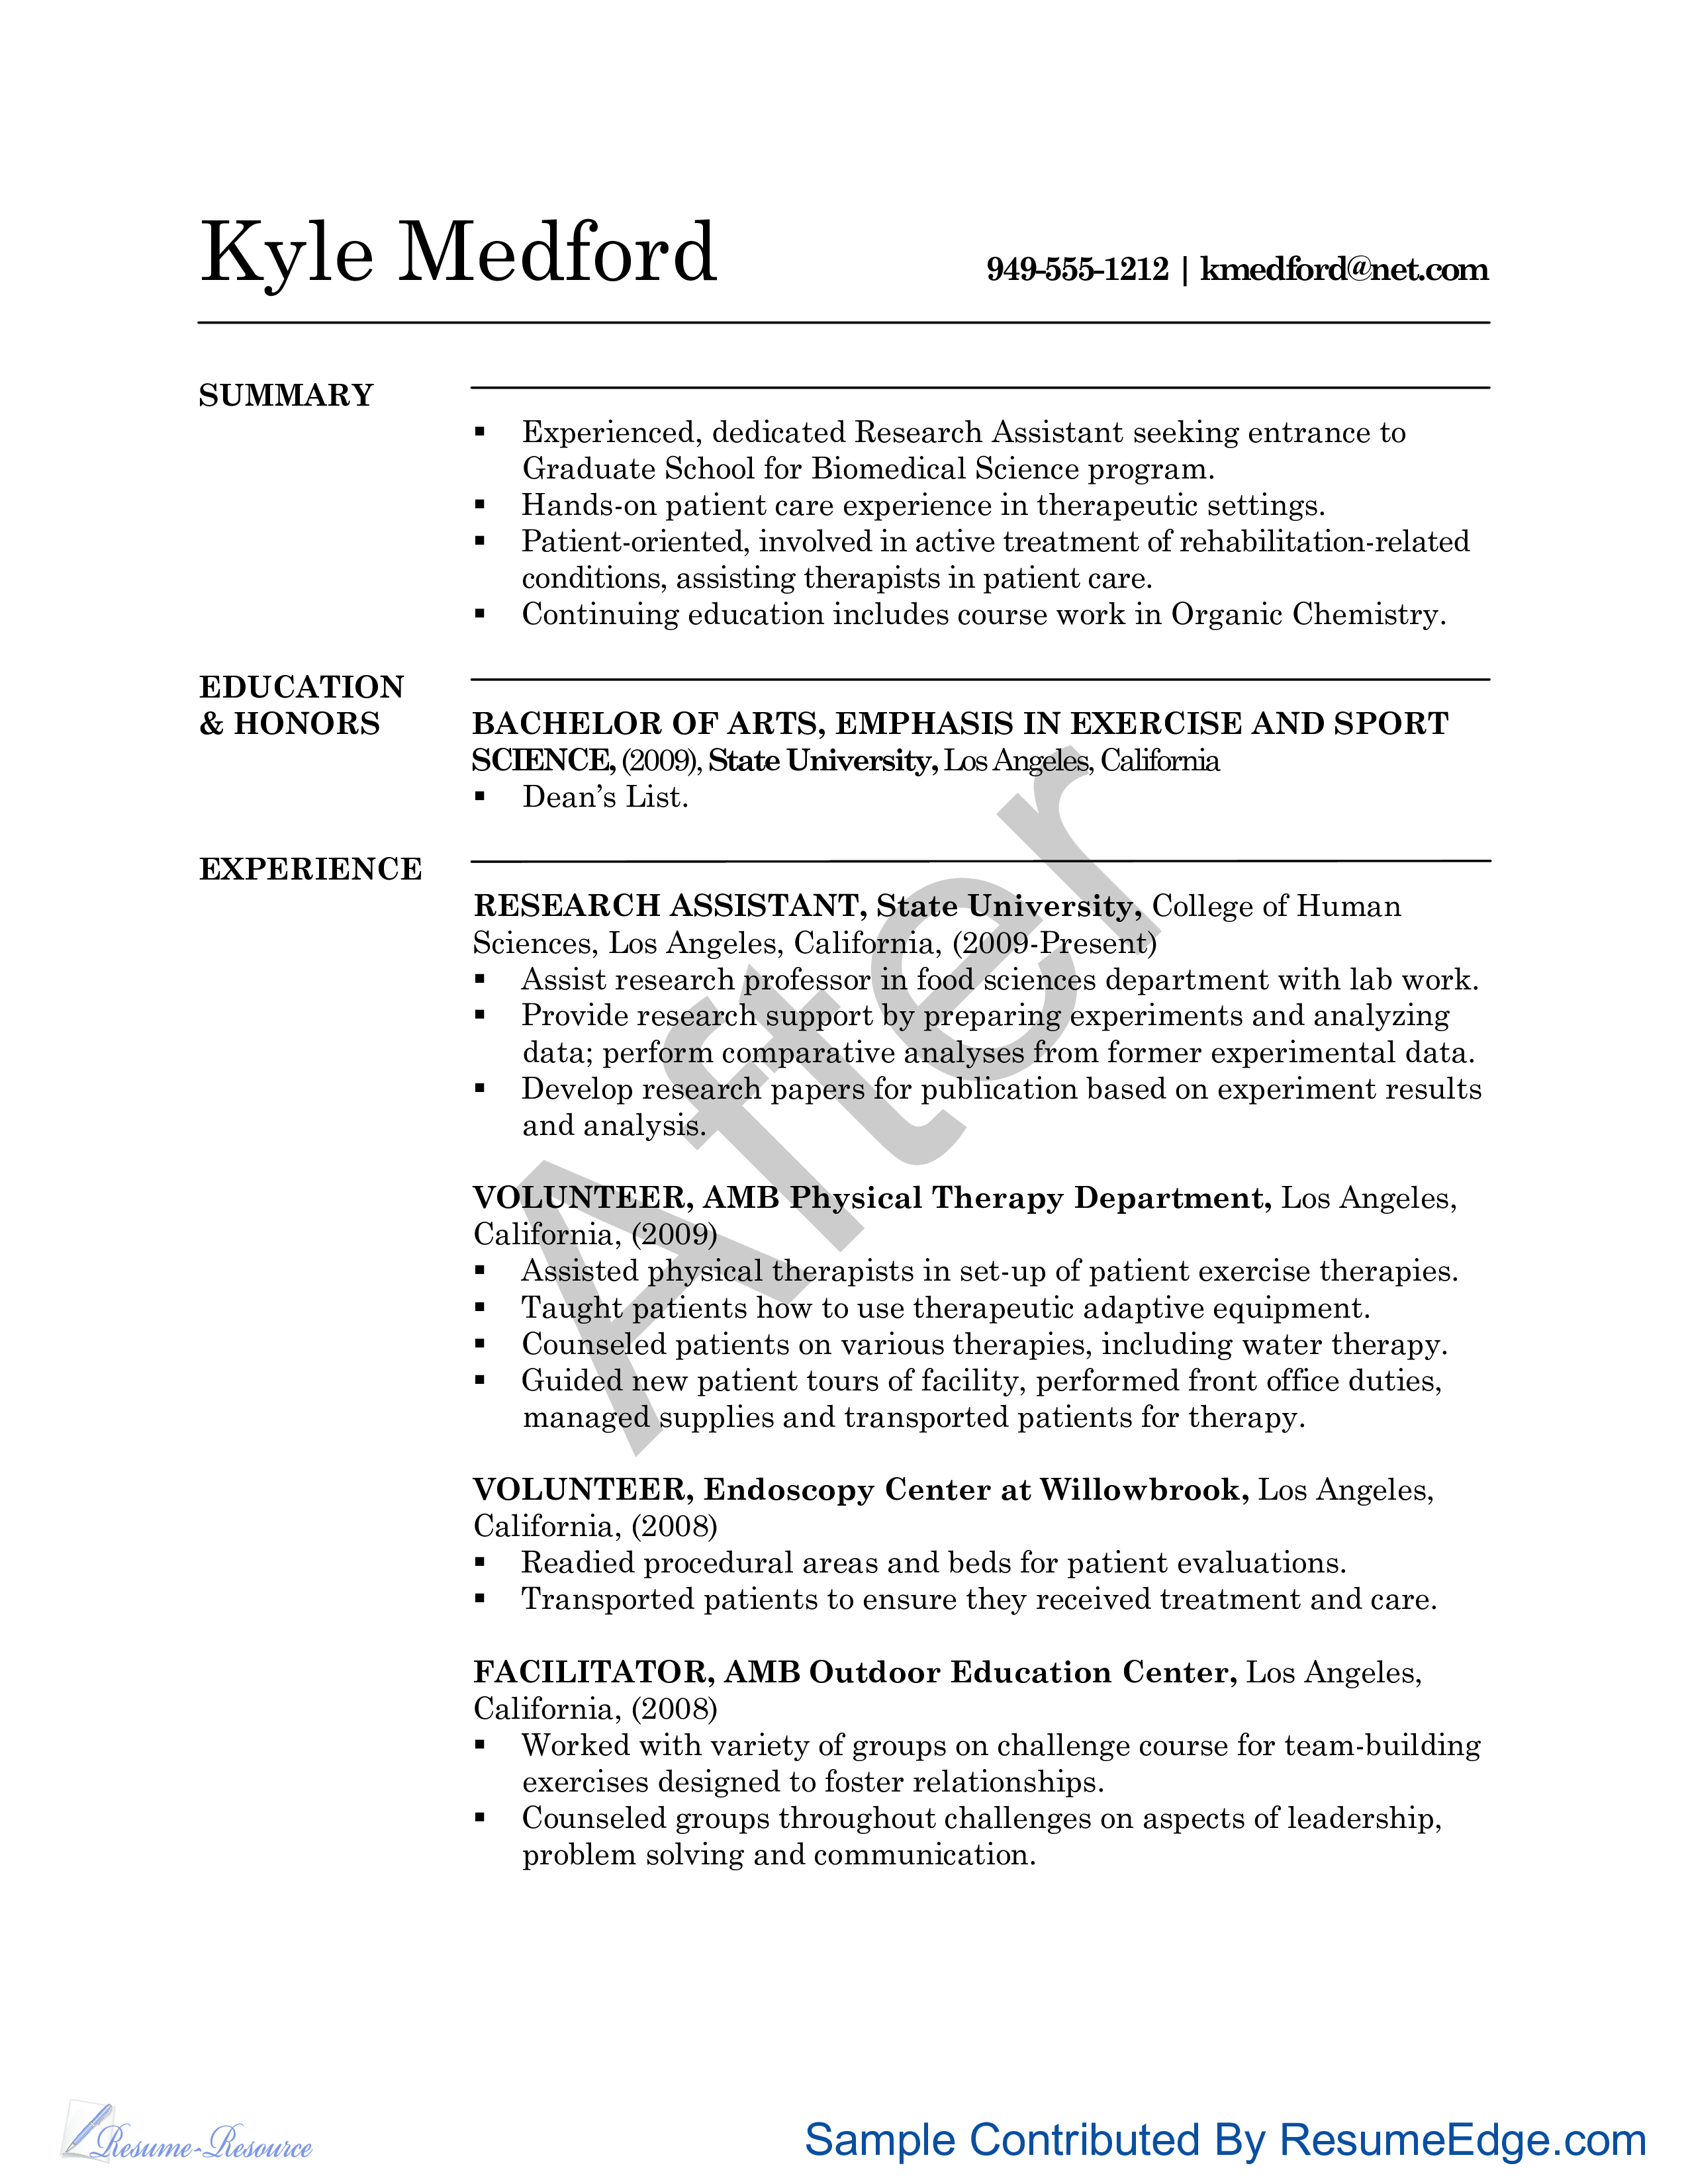 Research Assistant CV Sample 模板